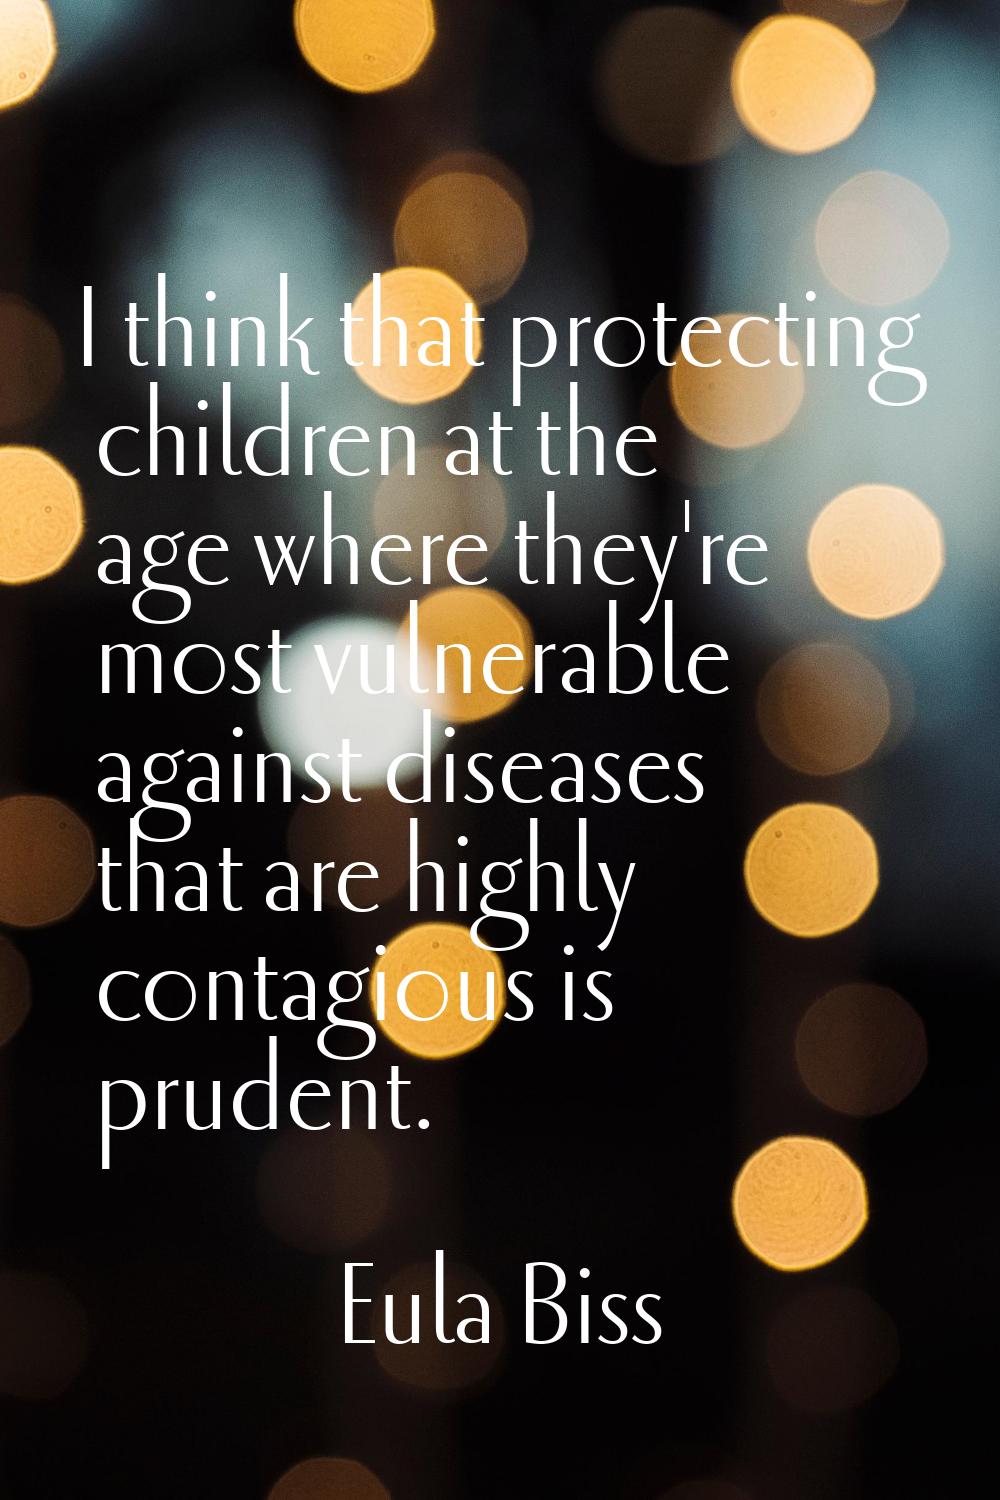 I think that protecting children at the age where they're most vulnerable against diseases that are